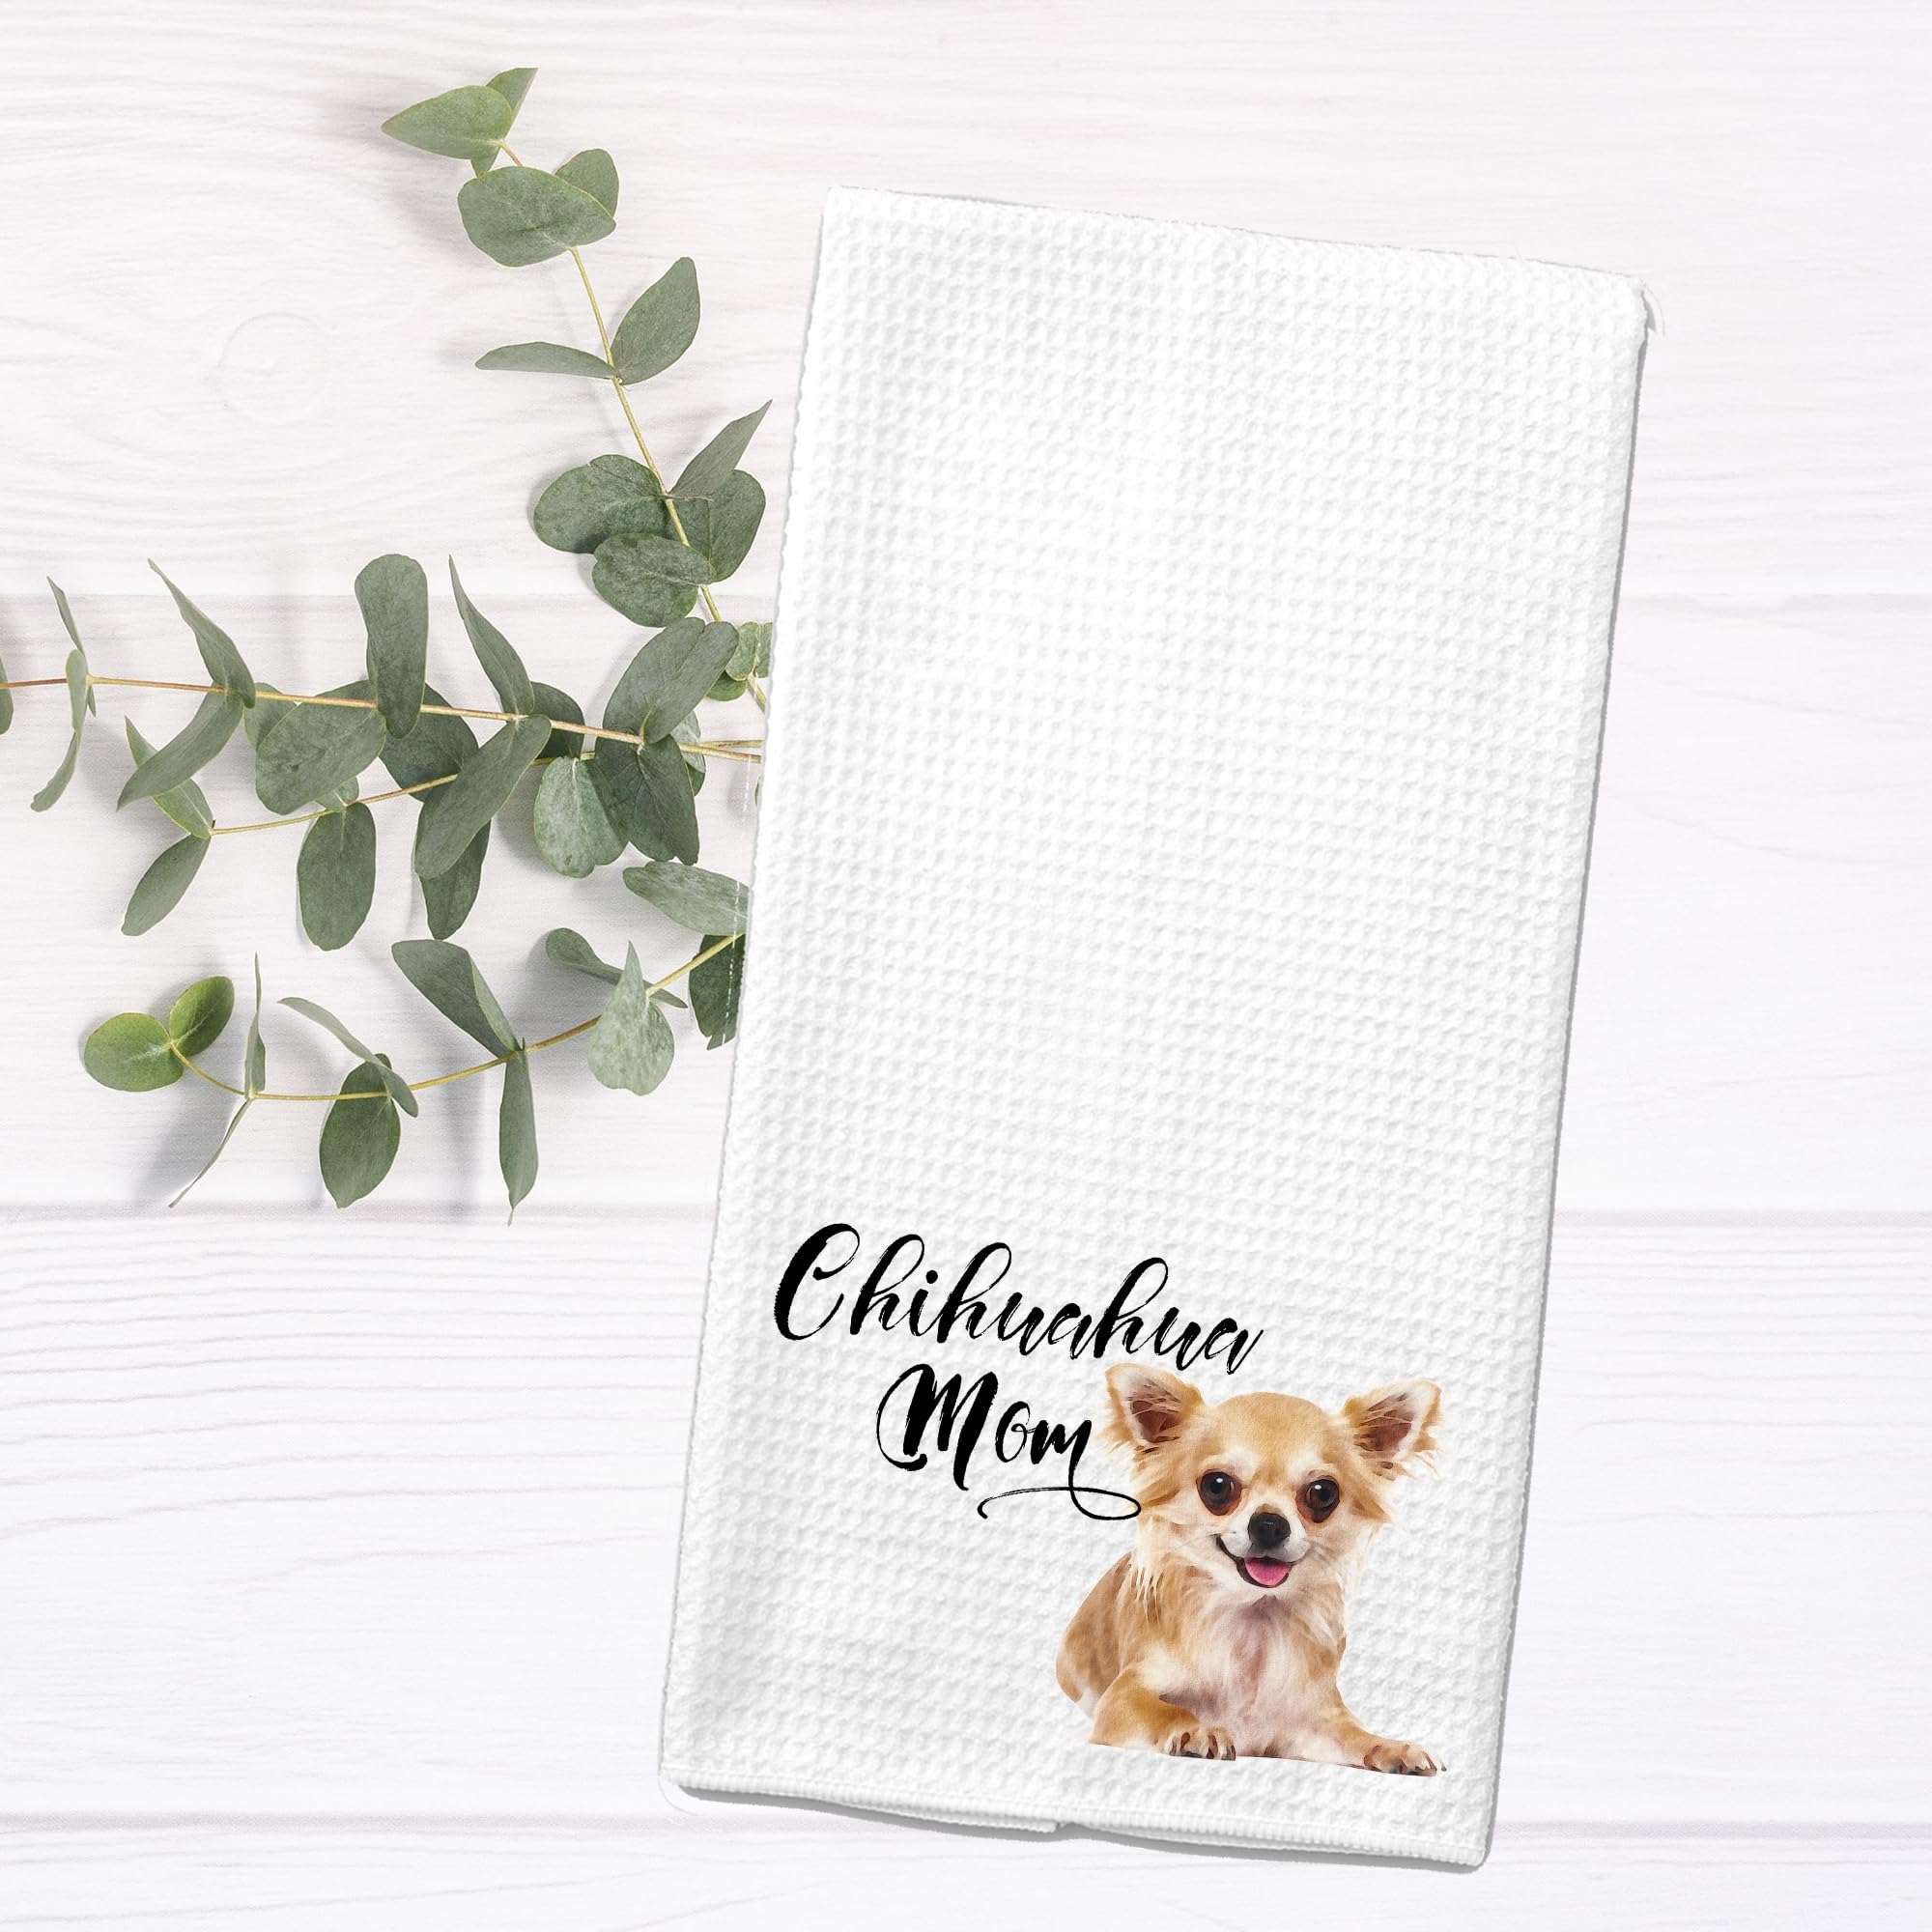 Chihuahua Mom Microfiber Kitchen Towel Gift for Animal Dog Lover